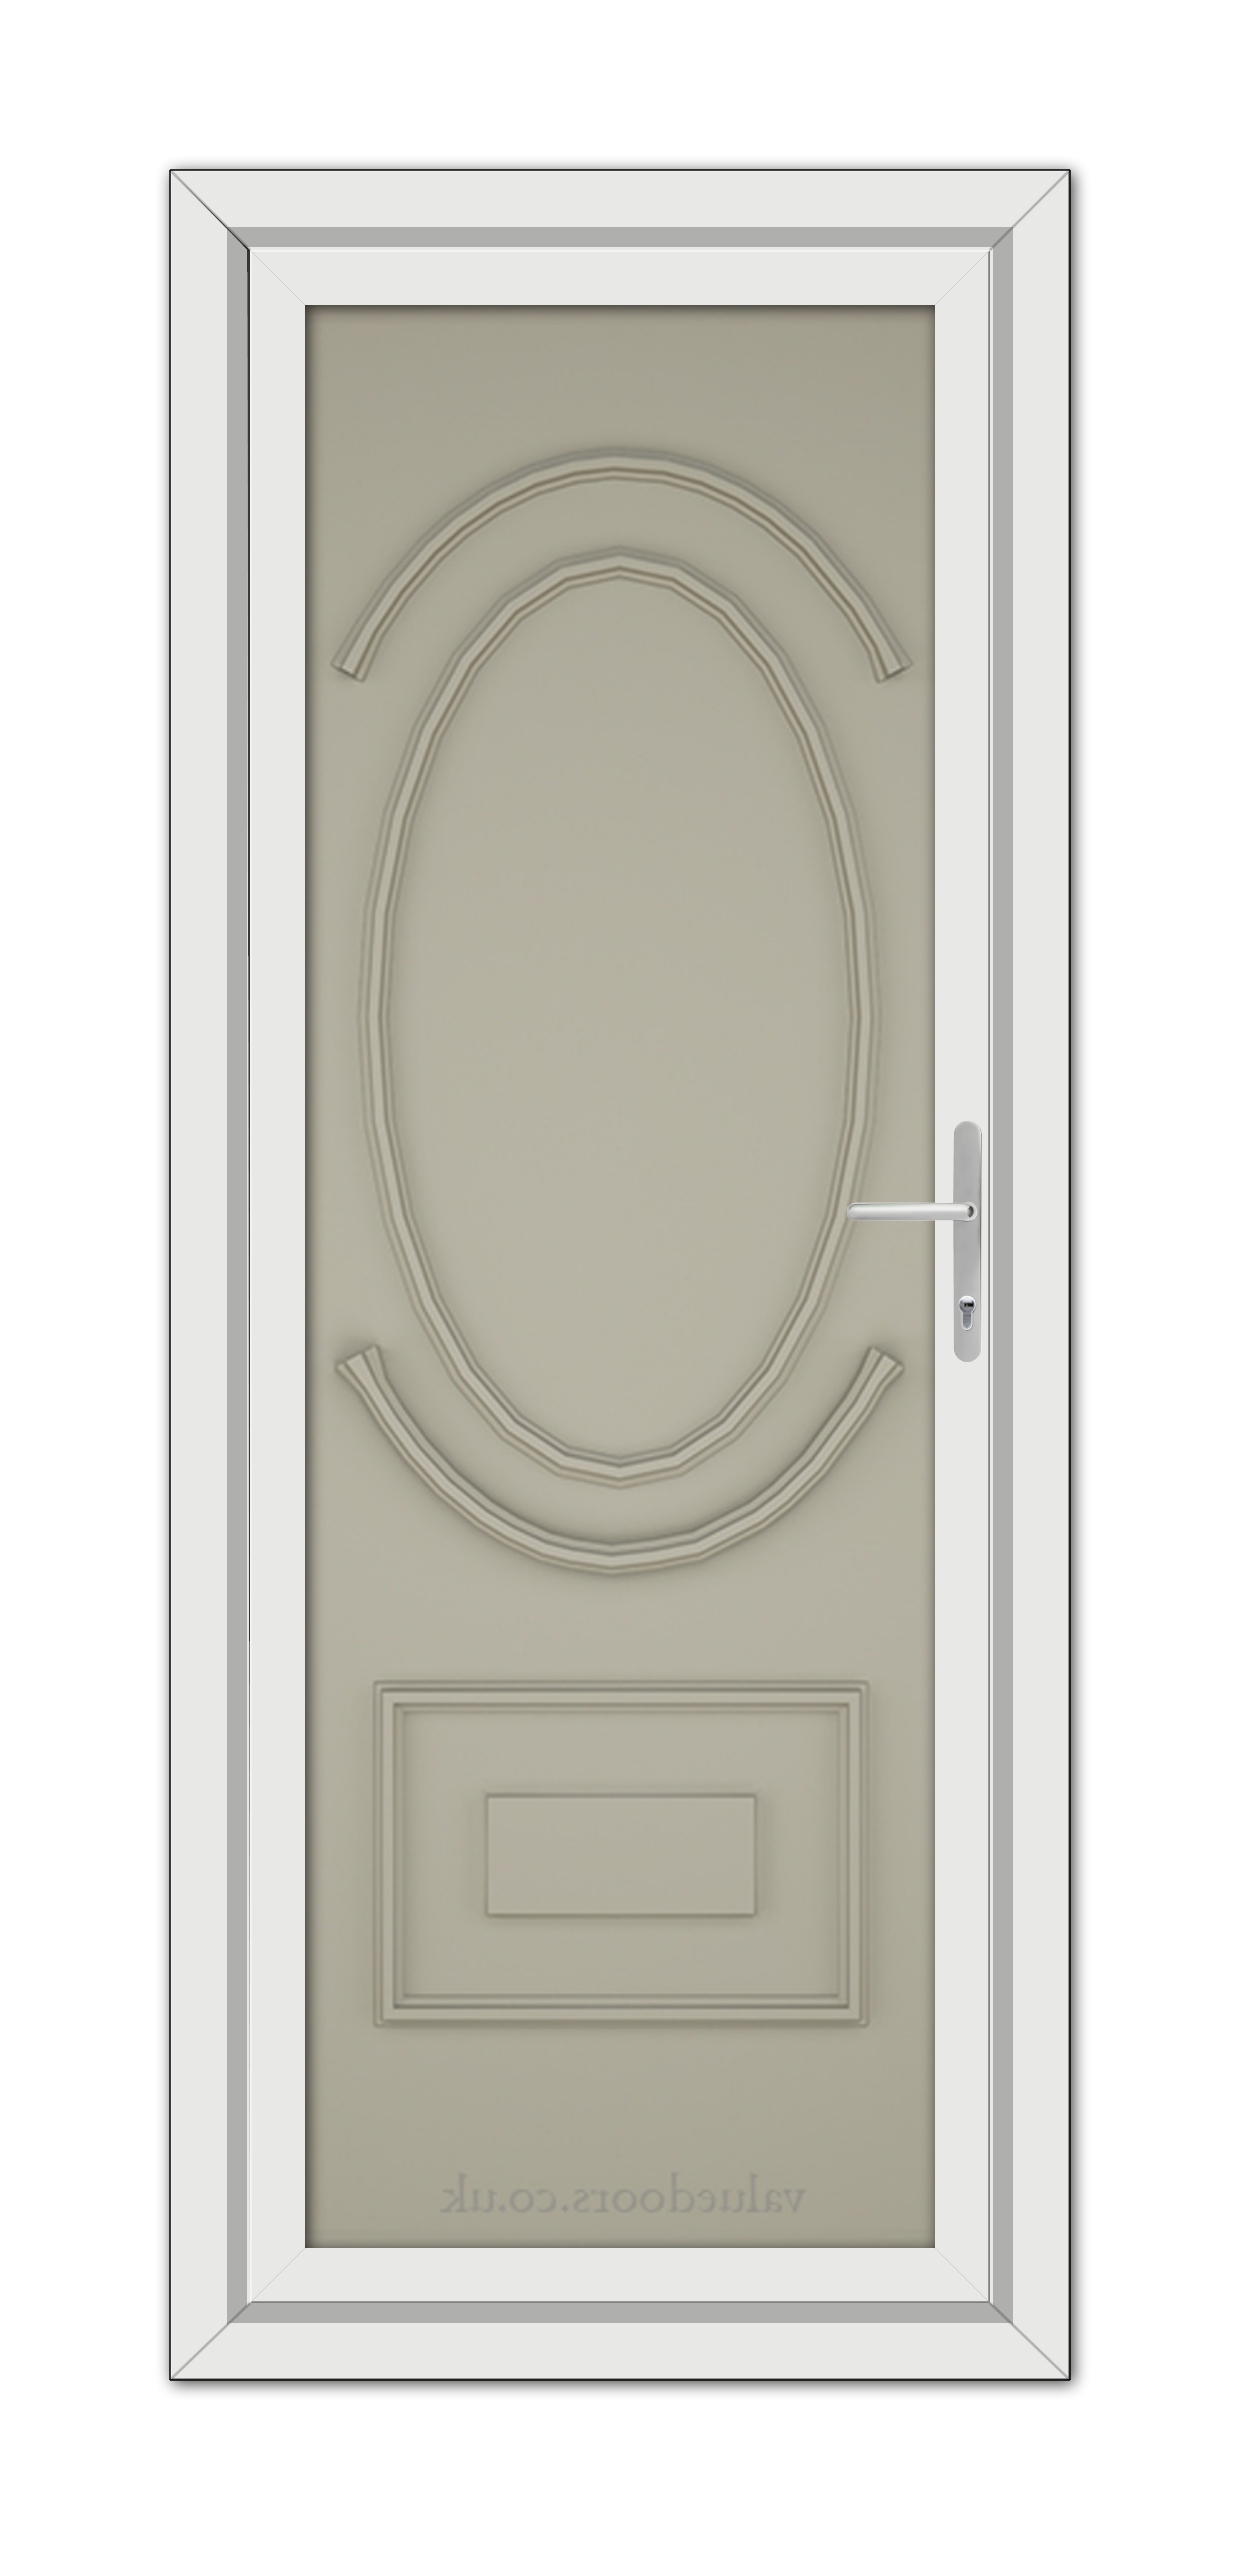 Front view of a closed, modern, Pebble Grey Richmond Solid uPVC door with an oval glass panel at the top and a metal handle on the right side.